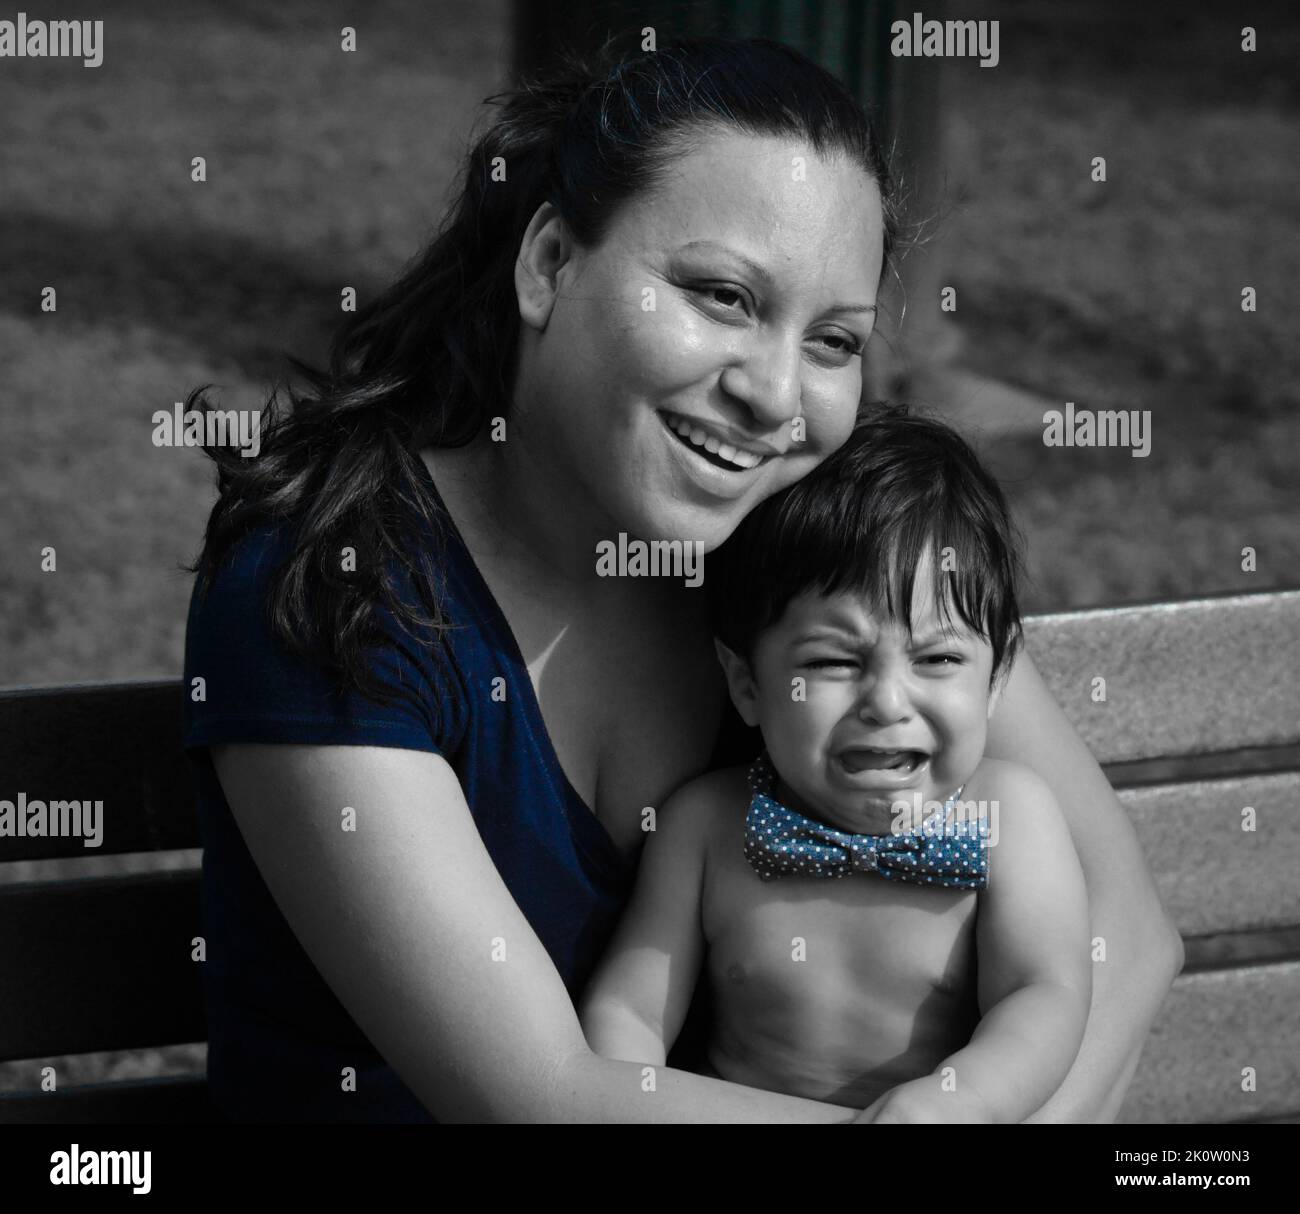 A smiling latina mother holds her crying baby on a park bench Stock Photo